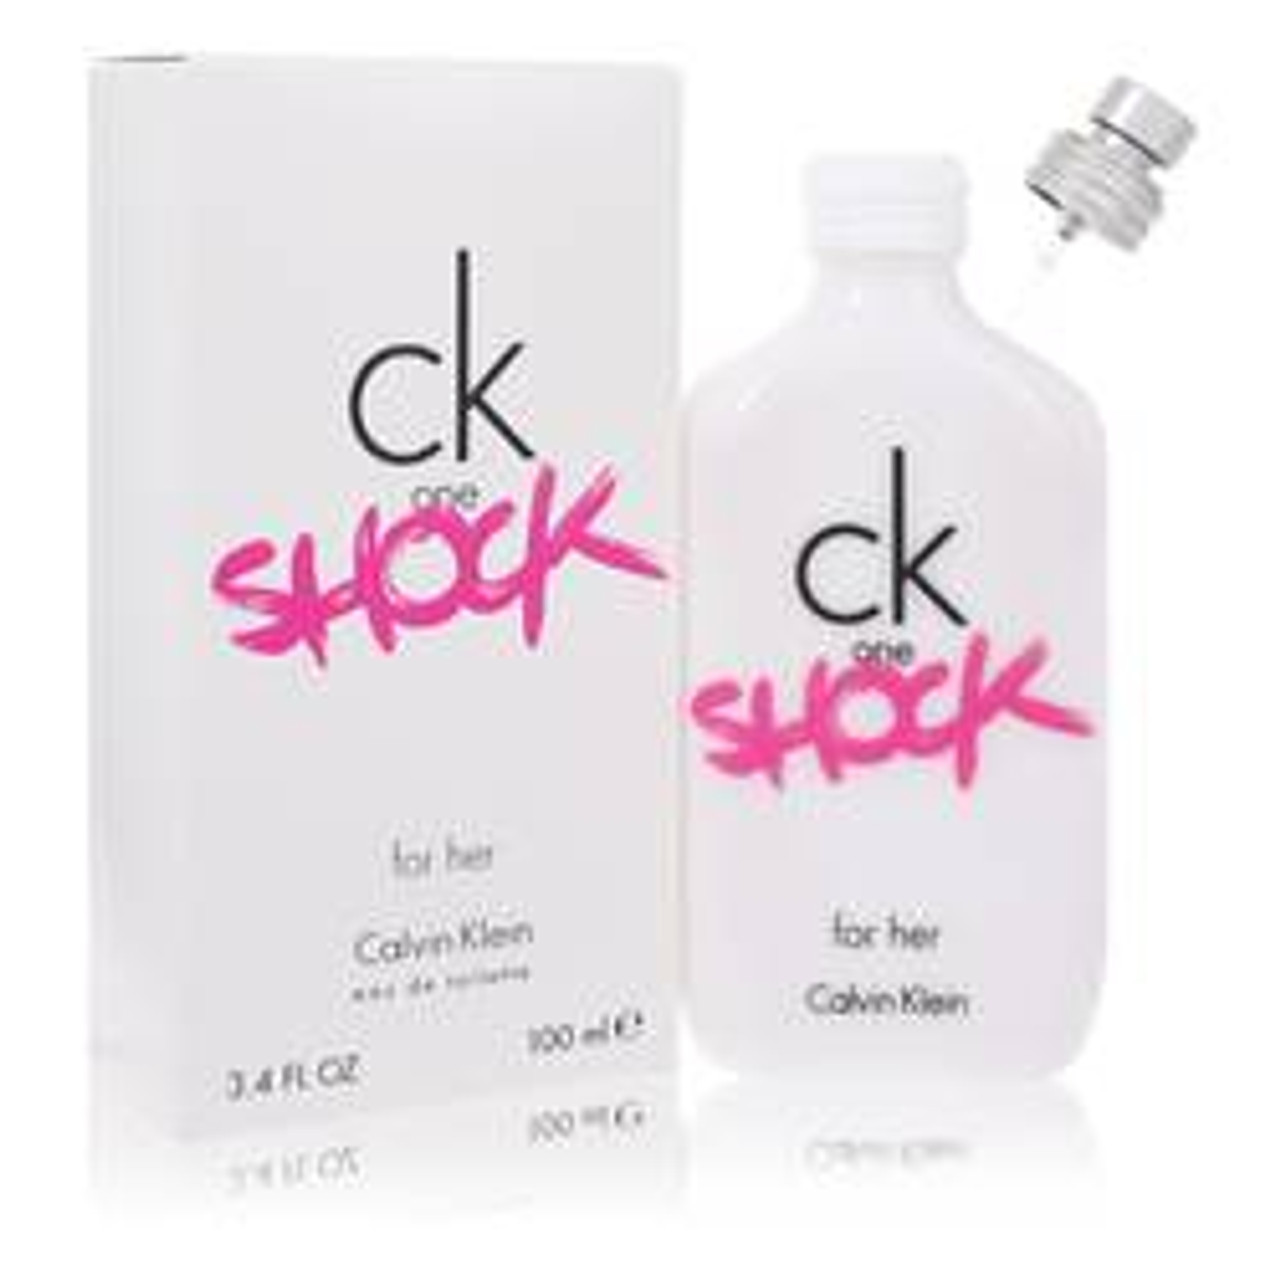 Ck One Shock Perfume By Calvin Klein Eau De Toilette Spray 3.4 oz for Women - [From 79.50 - Choose pk Qty ] - *Ships from Miami